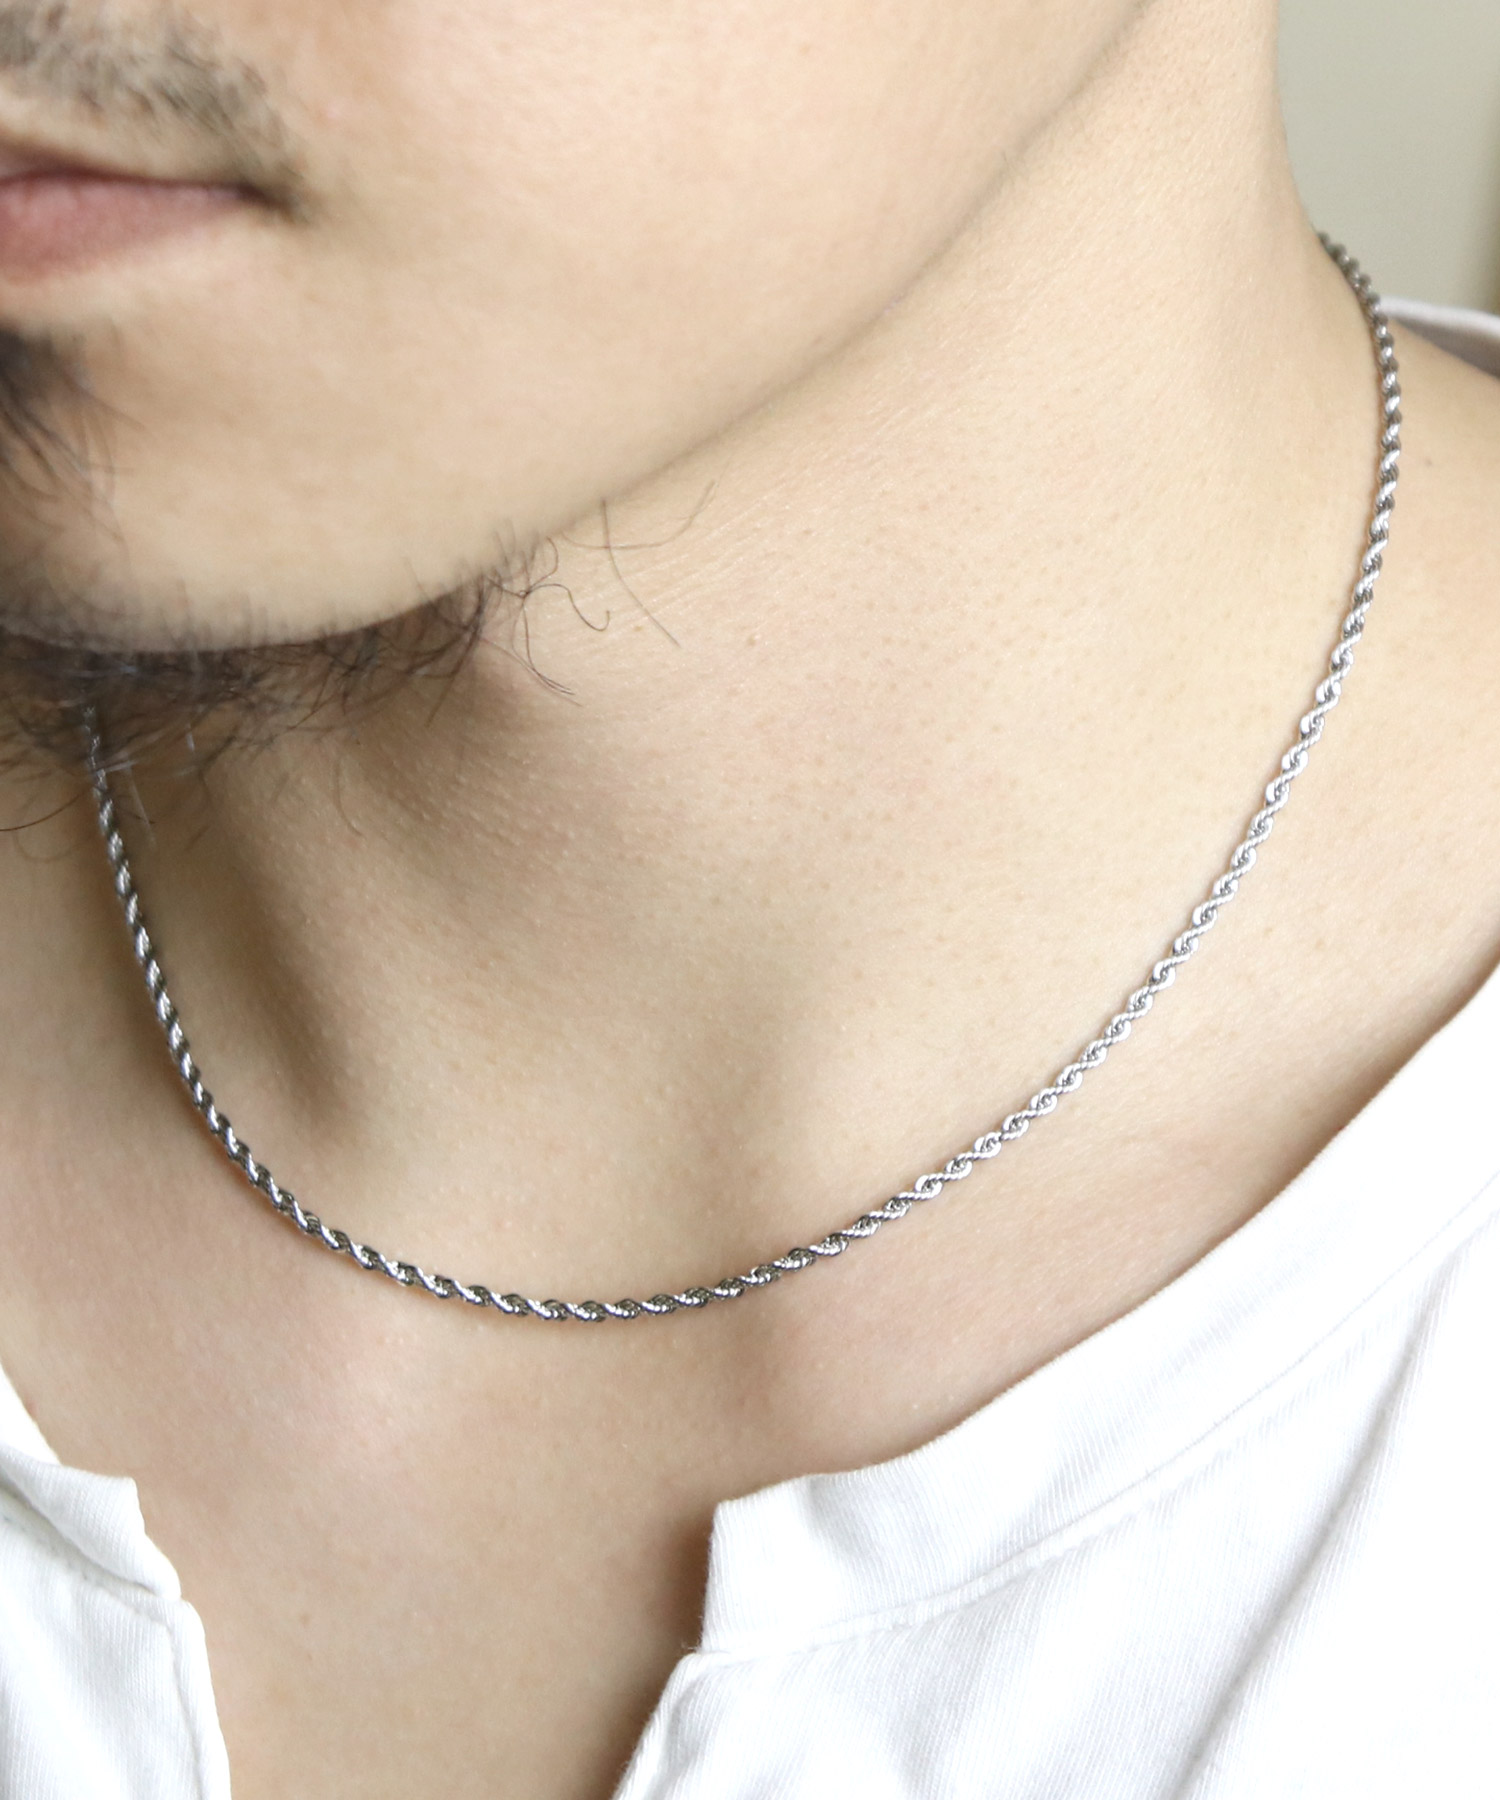 ego na gh?i/エゴナハイ】stainless necklacce twist chain